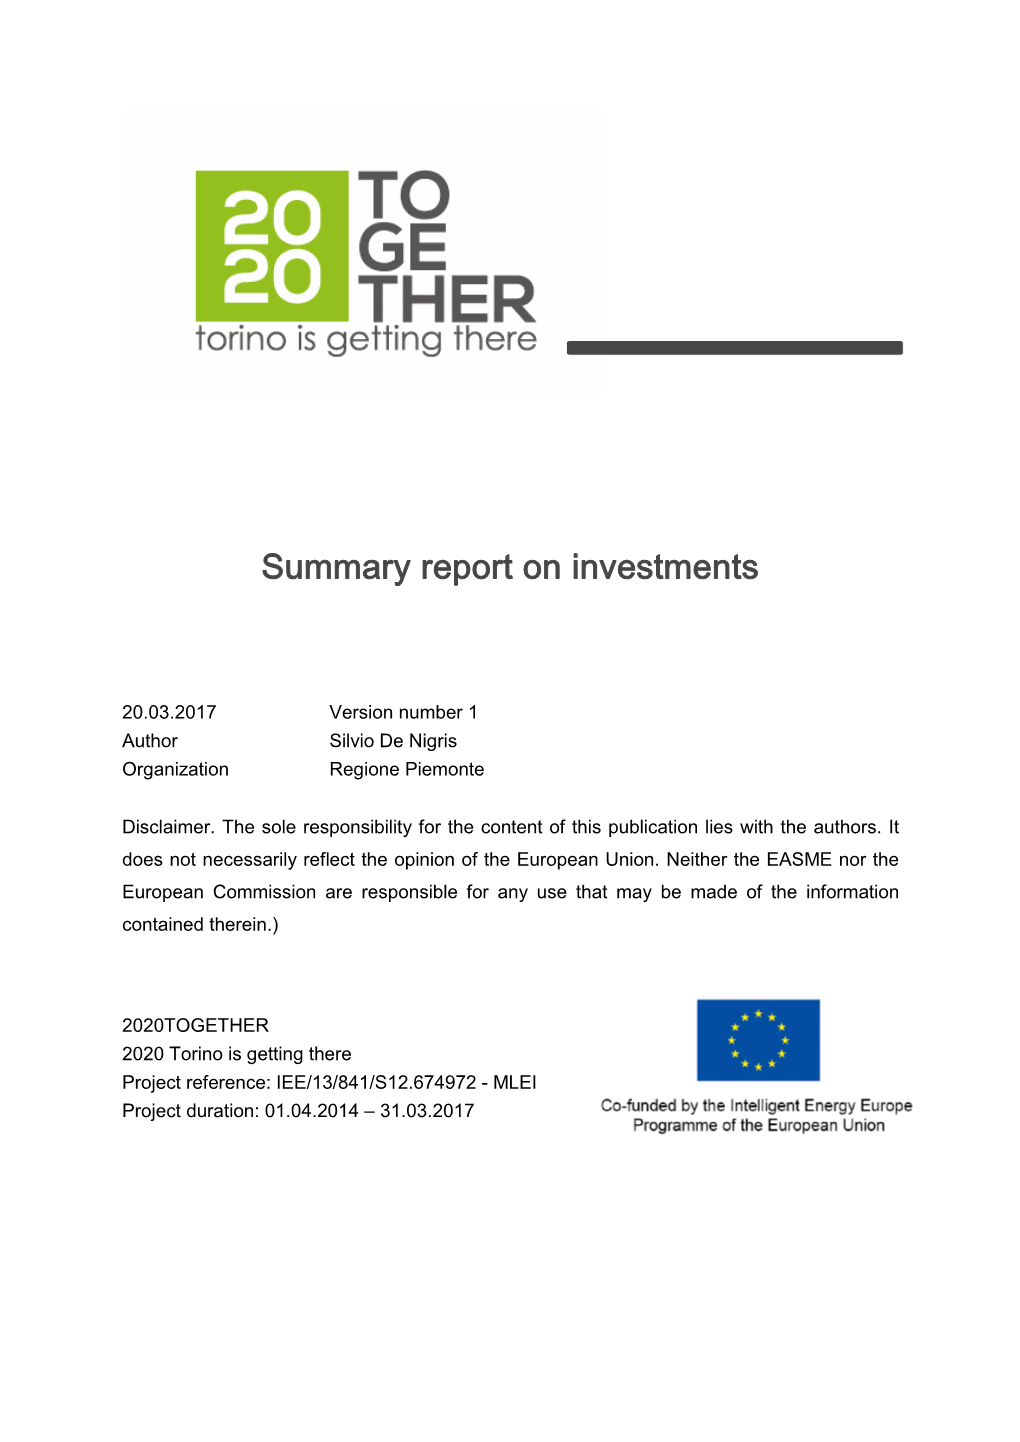 Summary Report on Investments